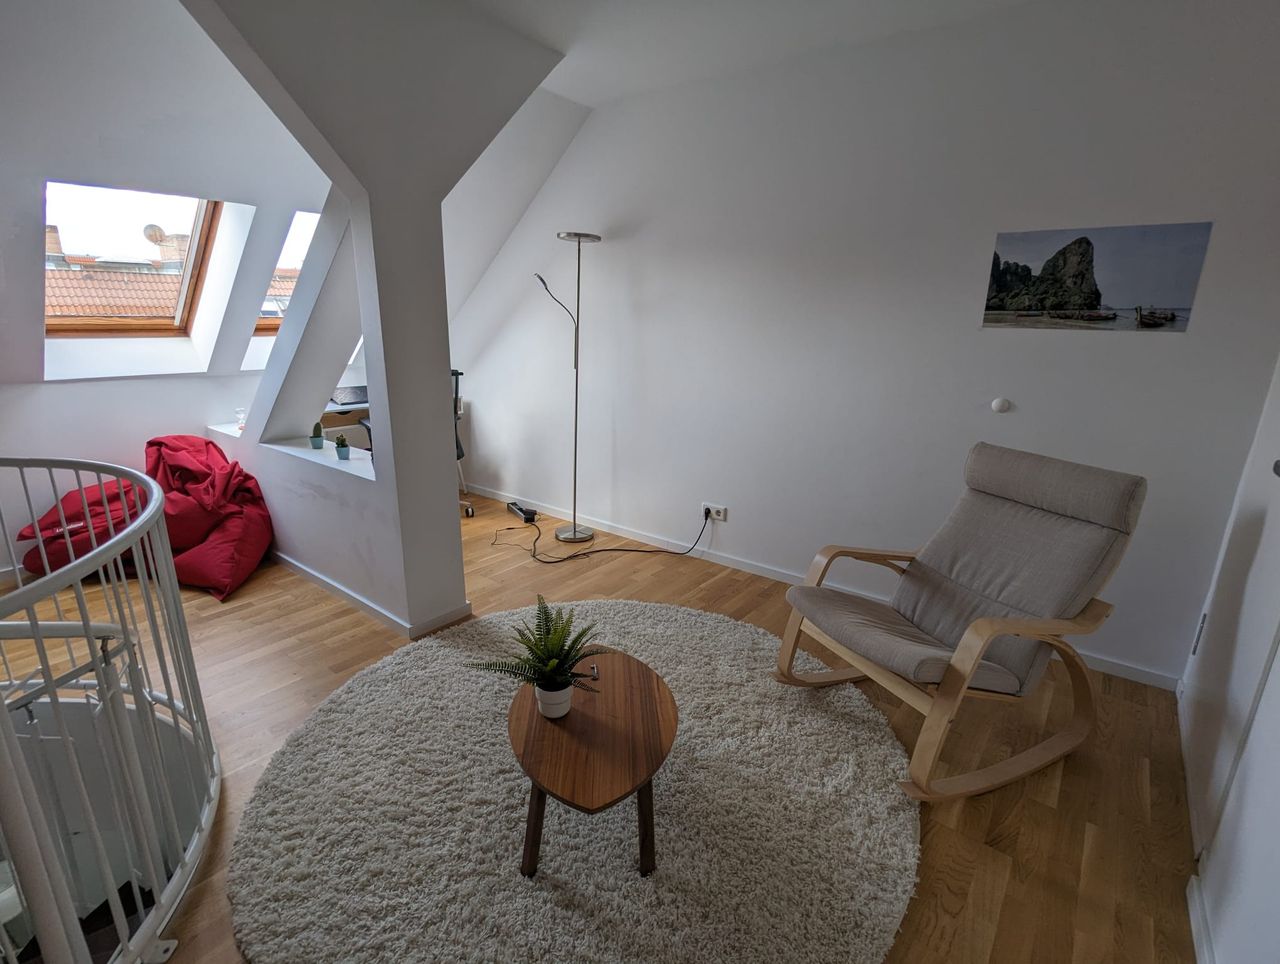 Stunning Fully Furnished and Renovated Duplex Apartment in Family-Friendly Pankow Neighborhood